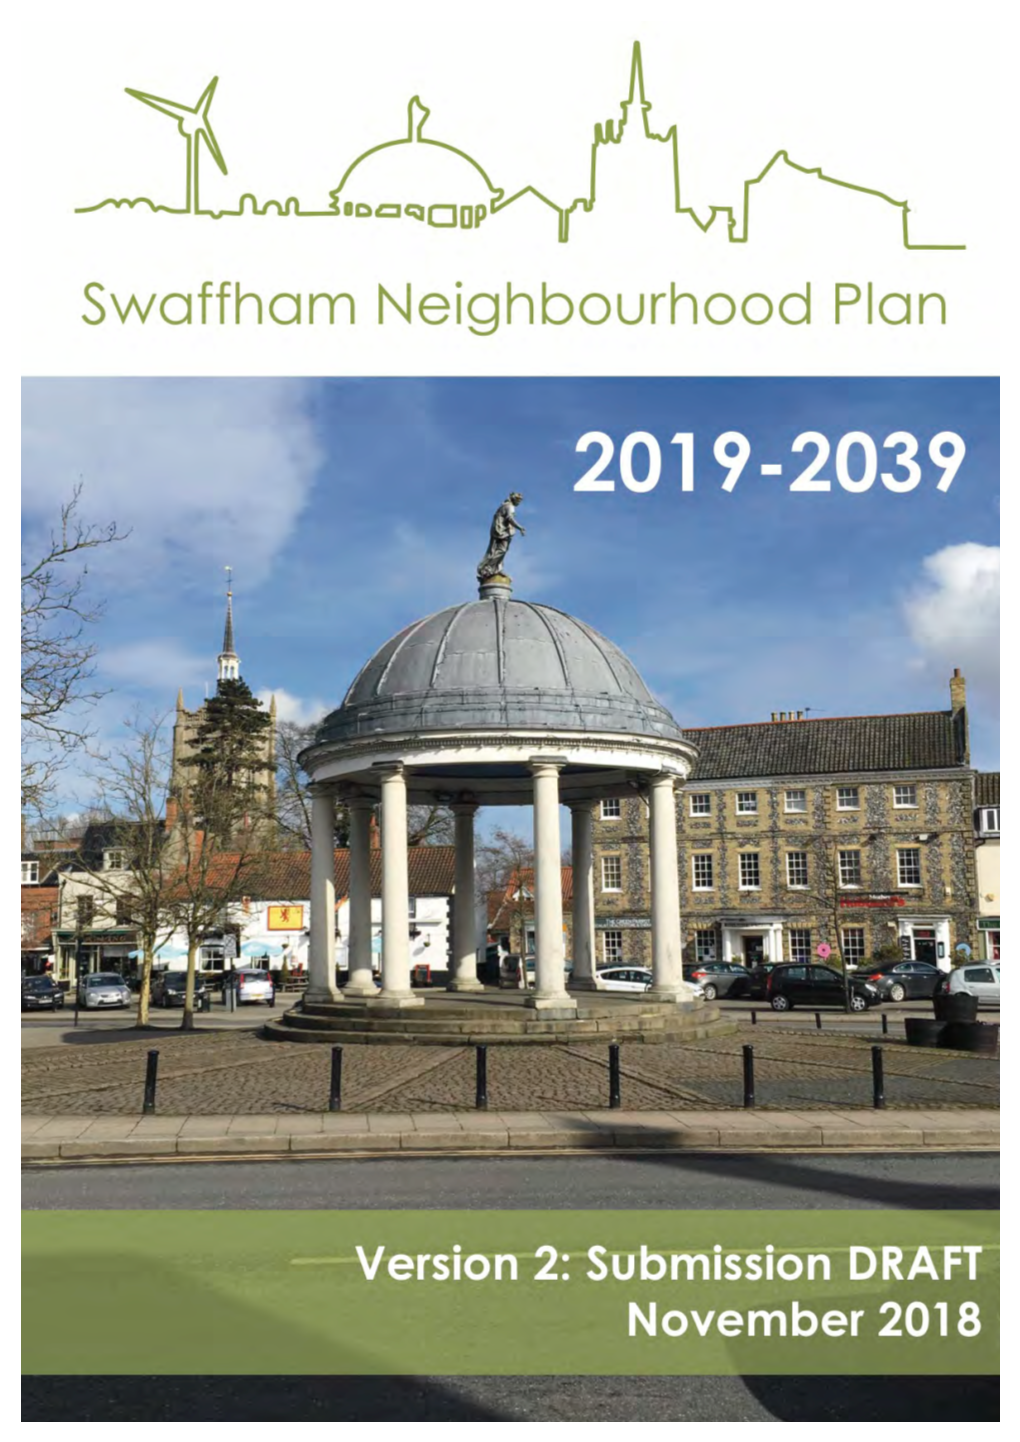 Swaffham Neighbourhood Plan Is a Community-Led Document for Guiding the Future Development of the Parish